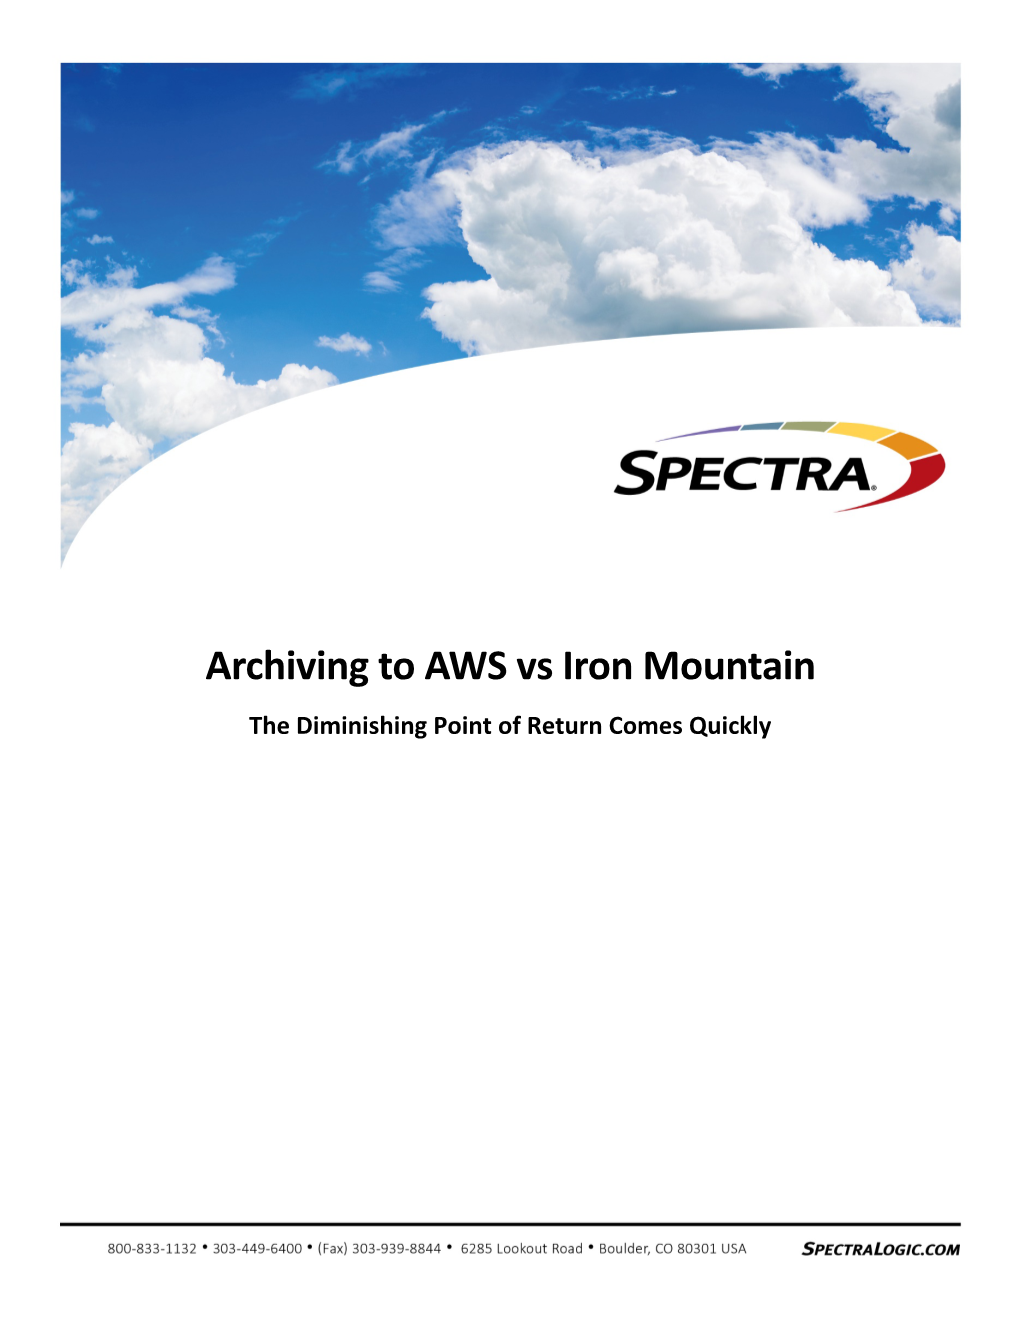 Archiving to AWS Vs Iron Mountain the Diminishing Point of Return Comes Quickly